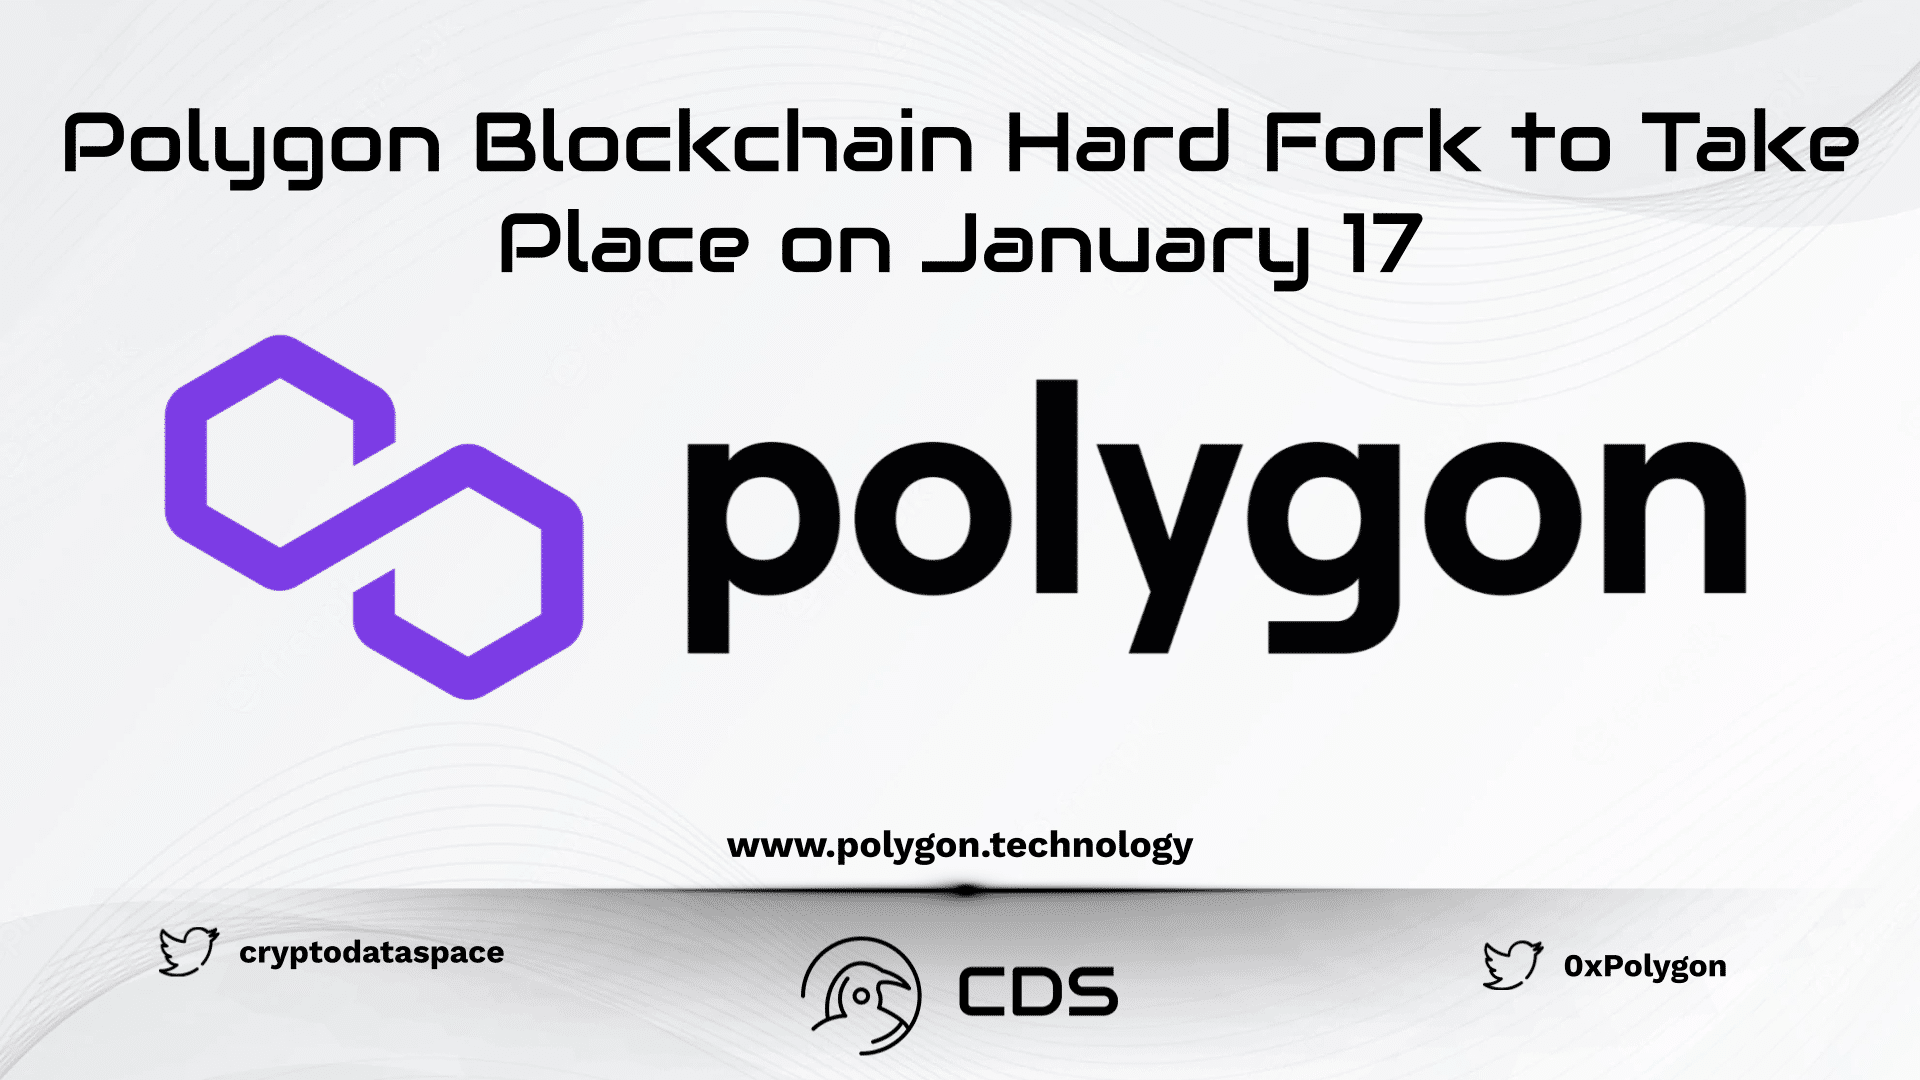 Polygon Blockchain Hard Fork to Take Place on January 17